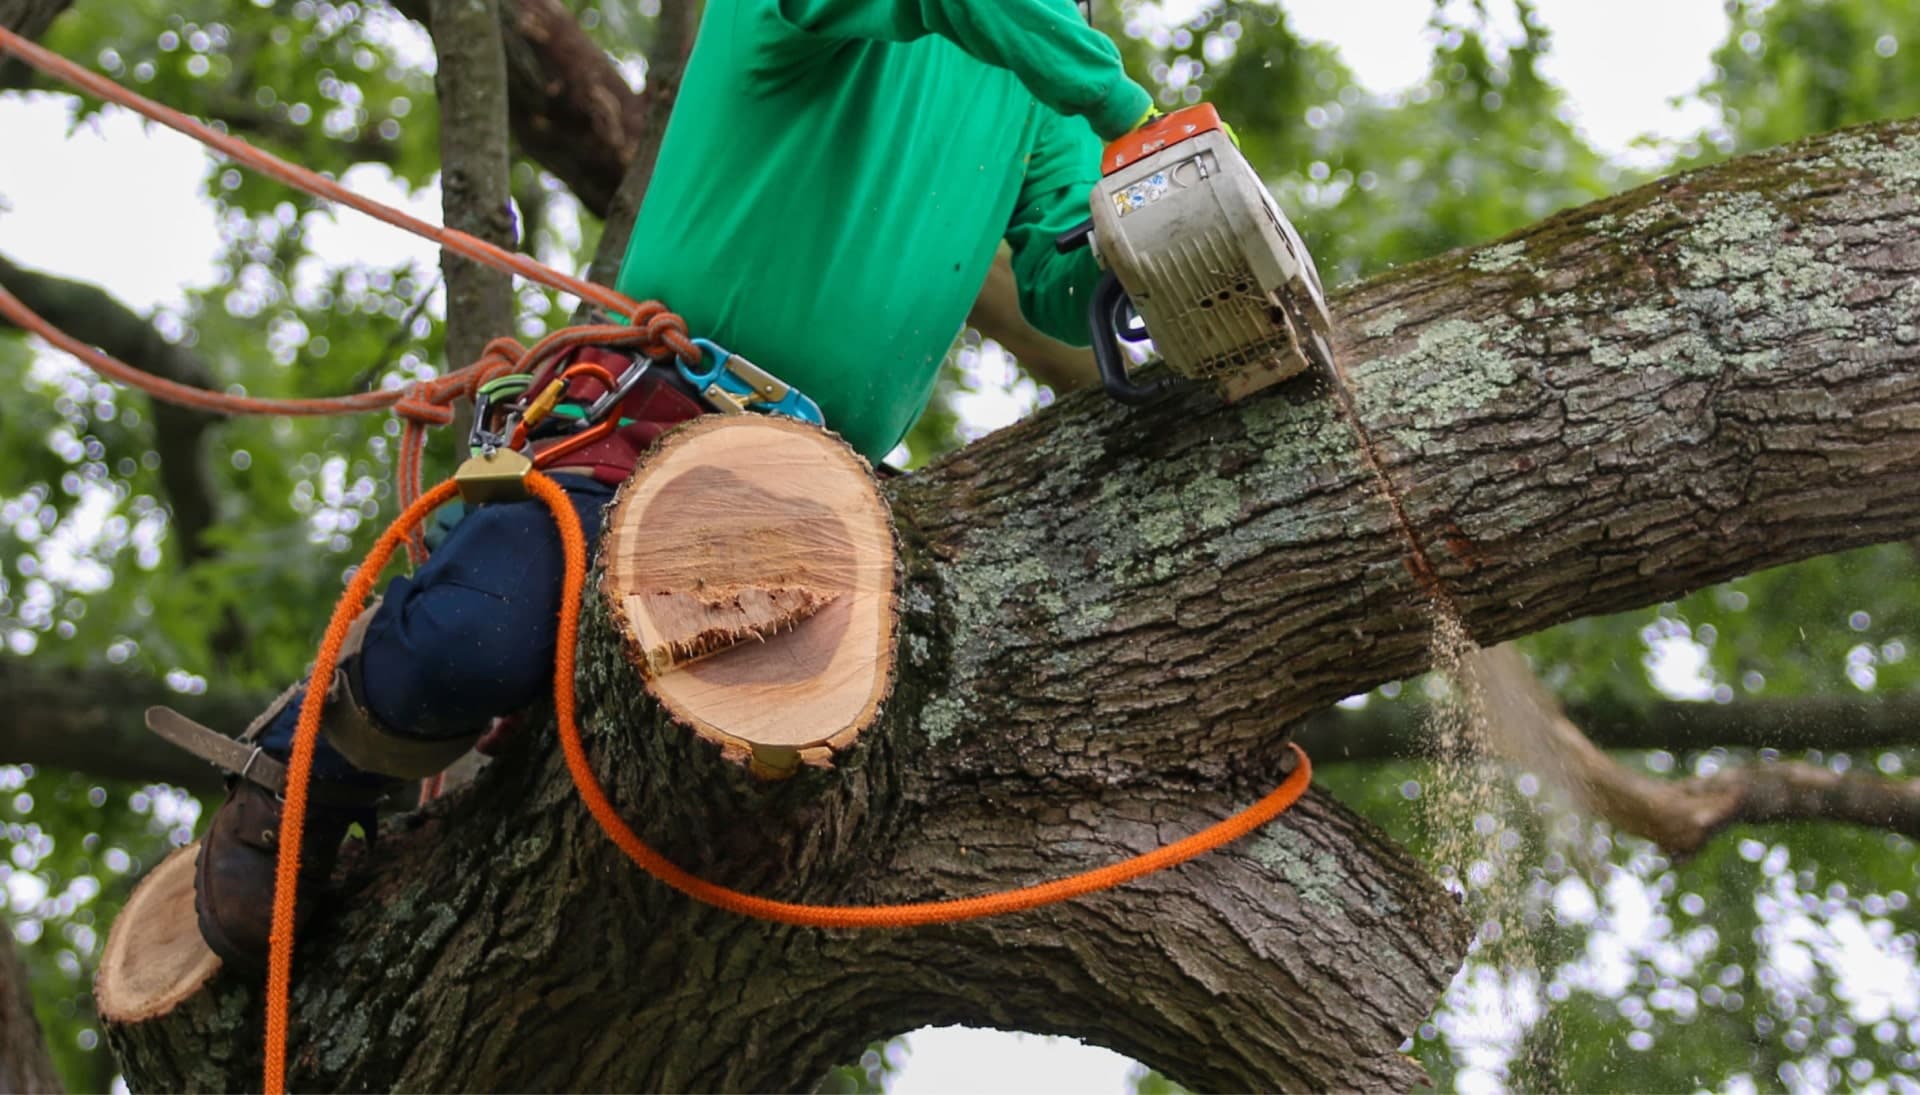 Shed your worries away with best tree removal in Miami